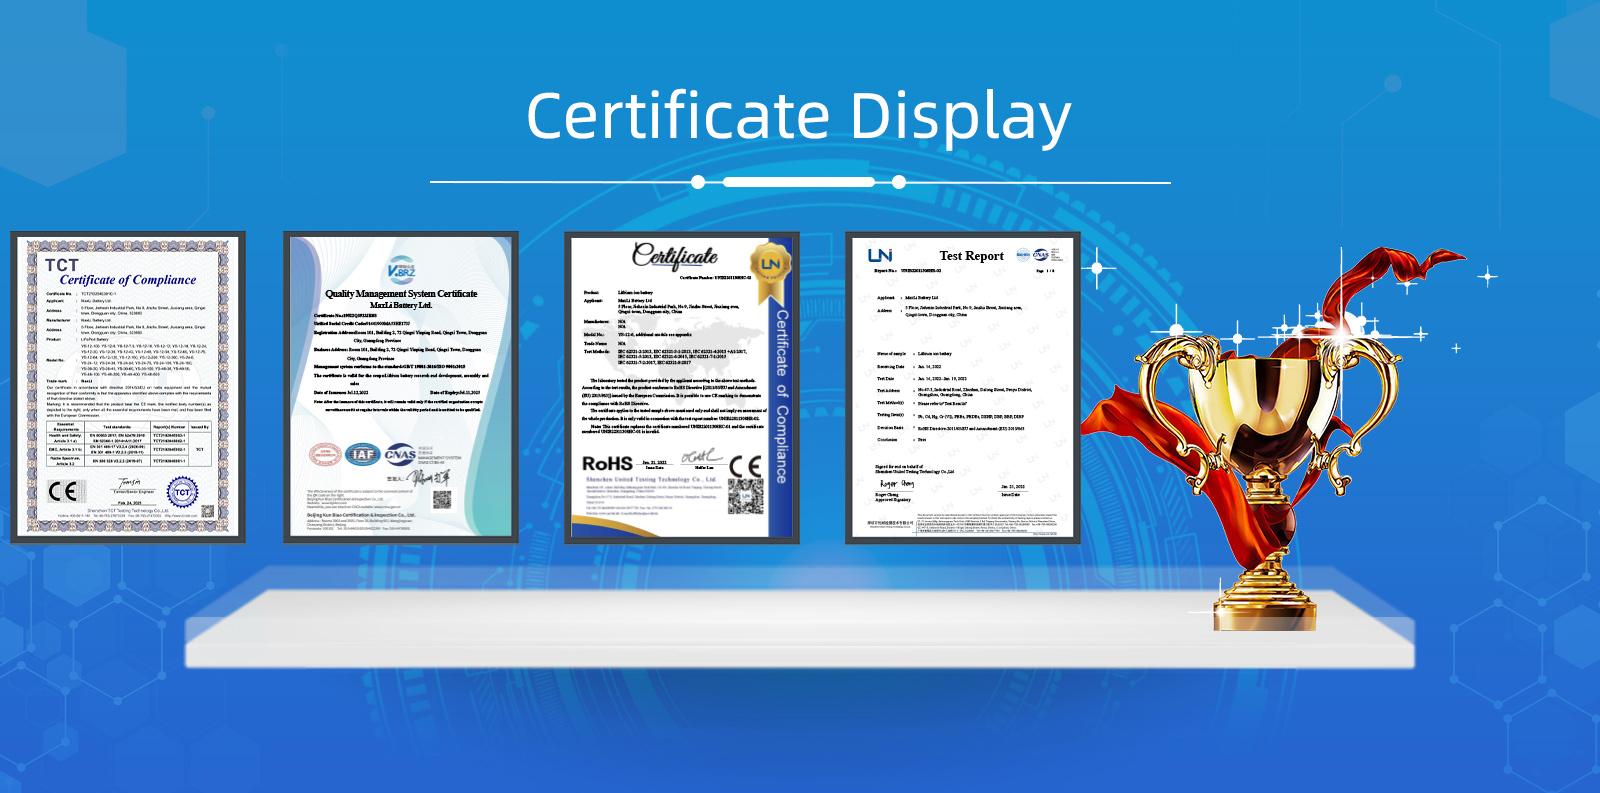 Authentication Certificate